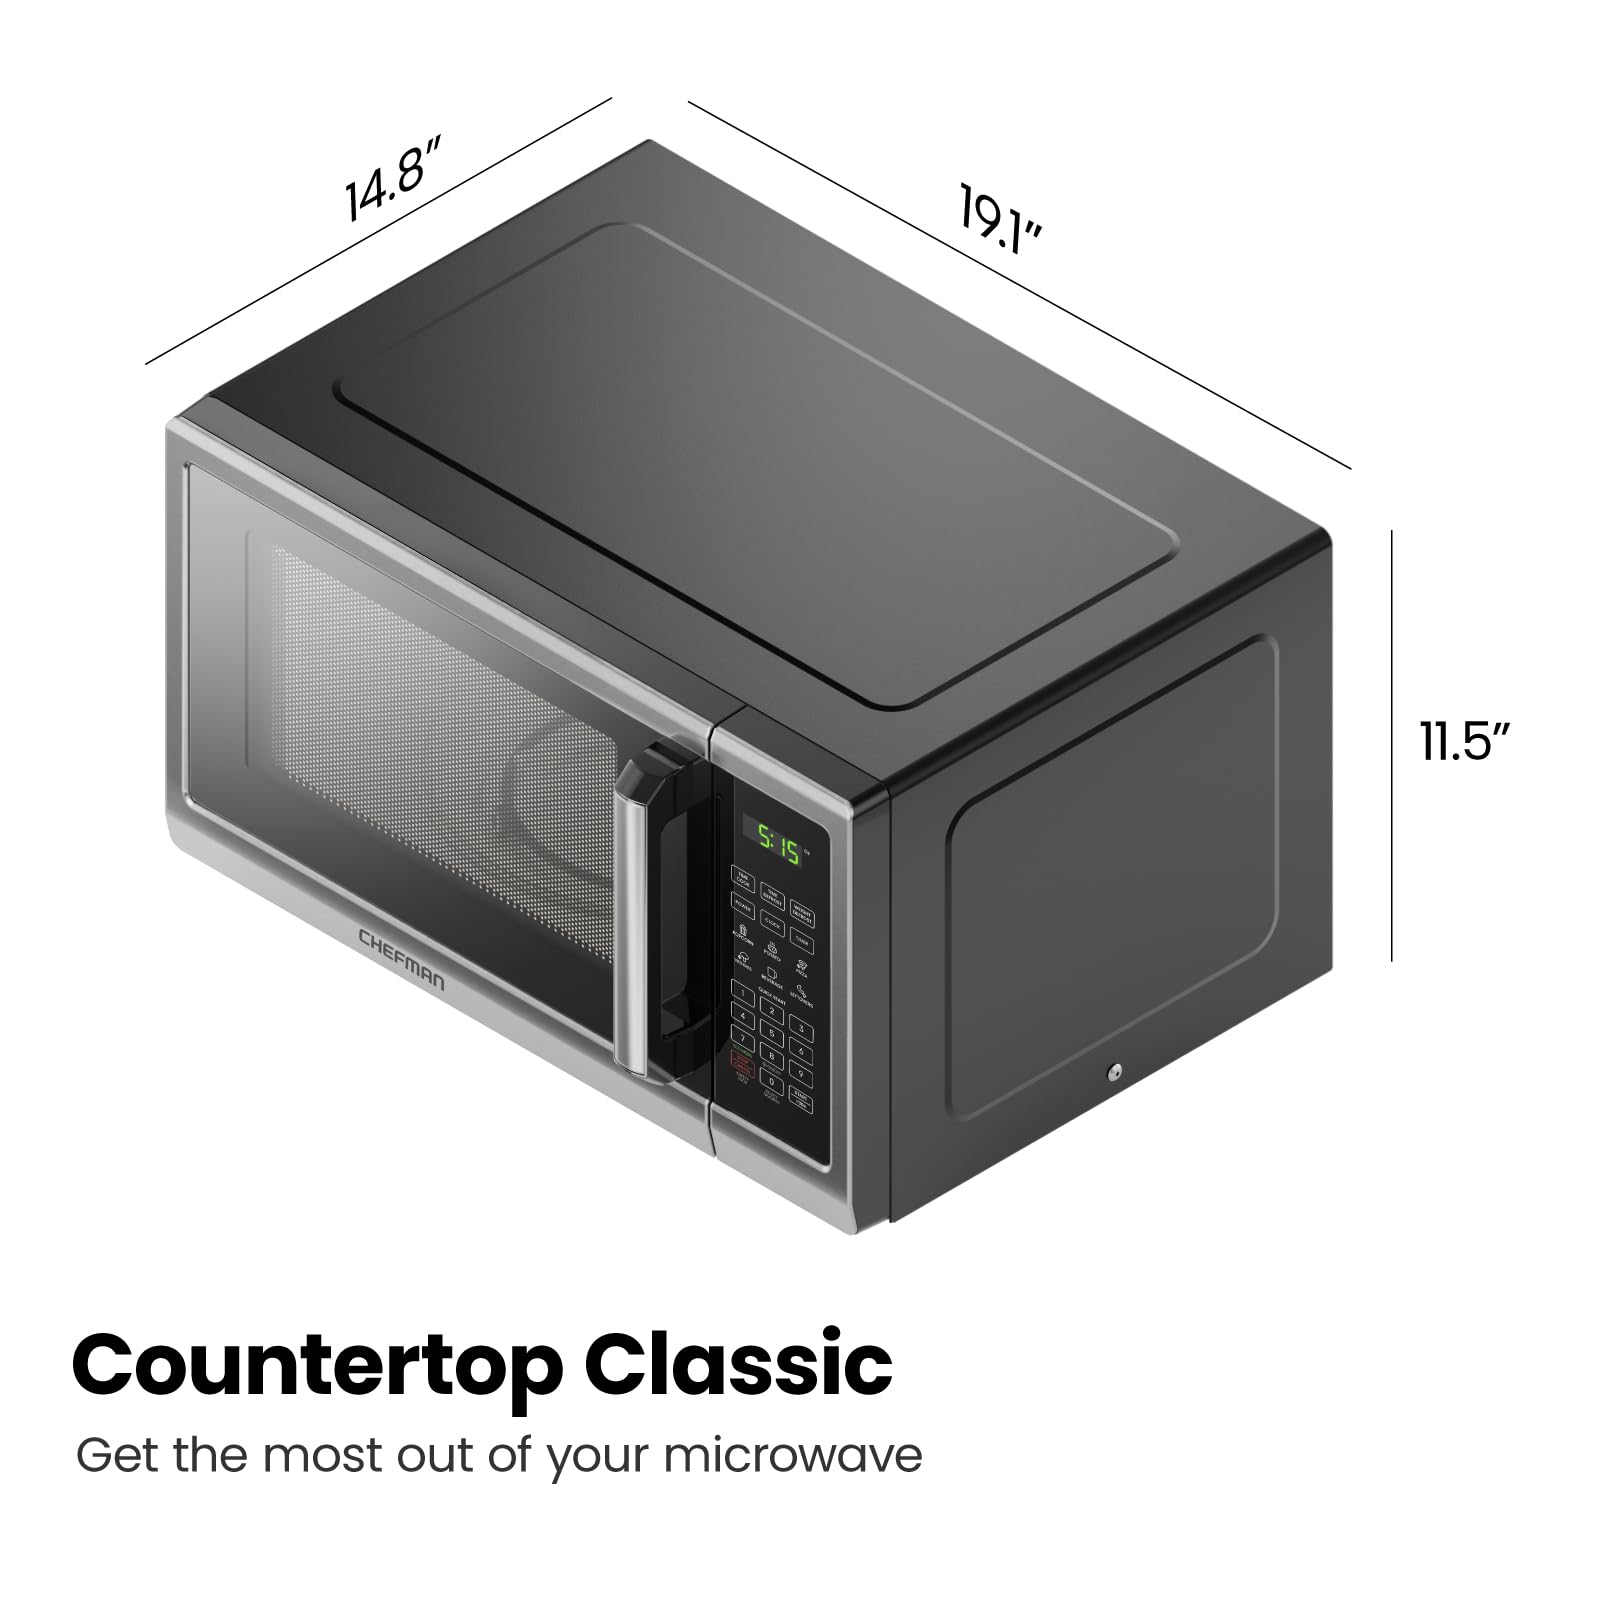 Chefman Countertop Microwave Oven 0.9 Cu. Ft. Digital Stainless Steel Microwave 900 Watt with 6 Presets, Eco Mode, Mute Option, Memory Function, Child Safety Lock, Kitchen, Home, Dorm Essentials